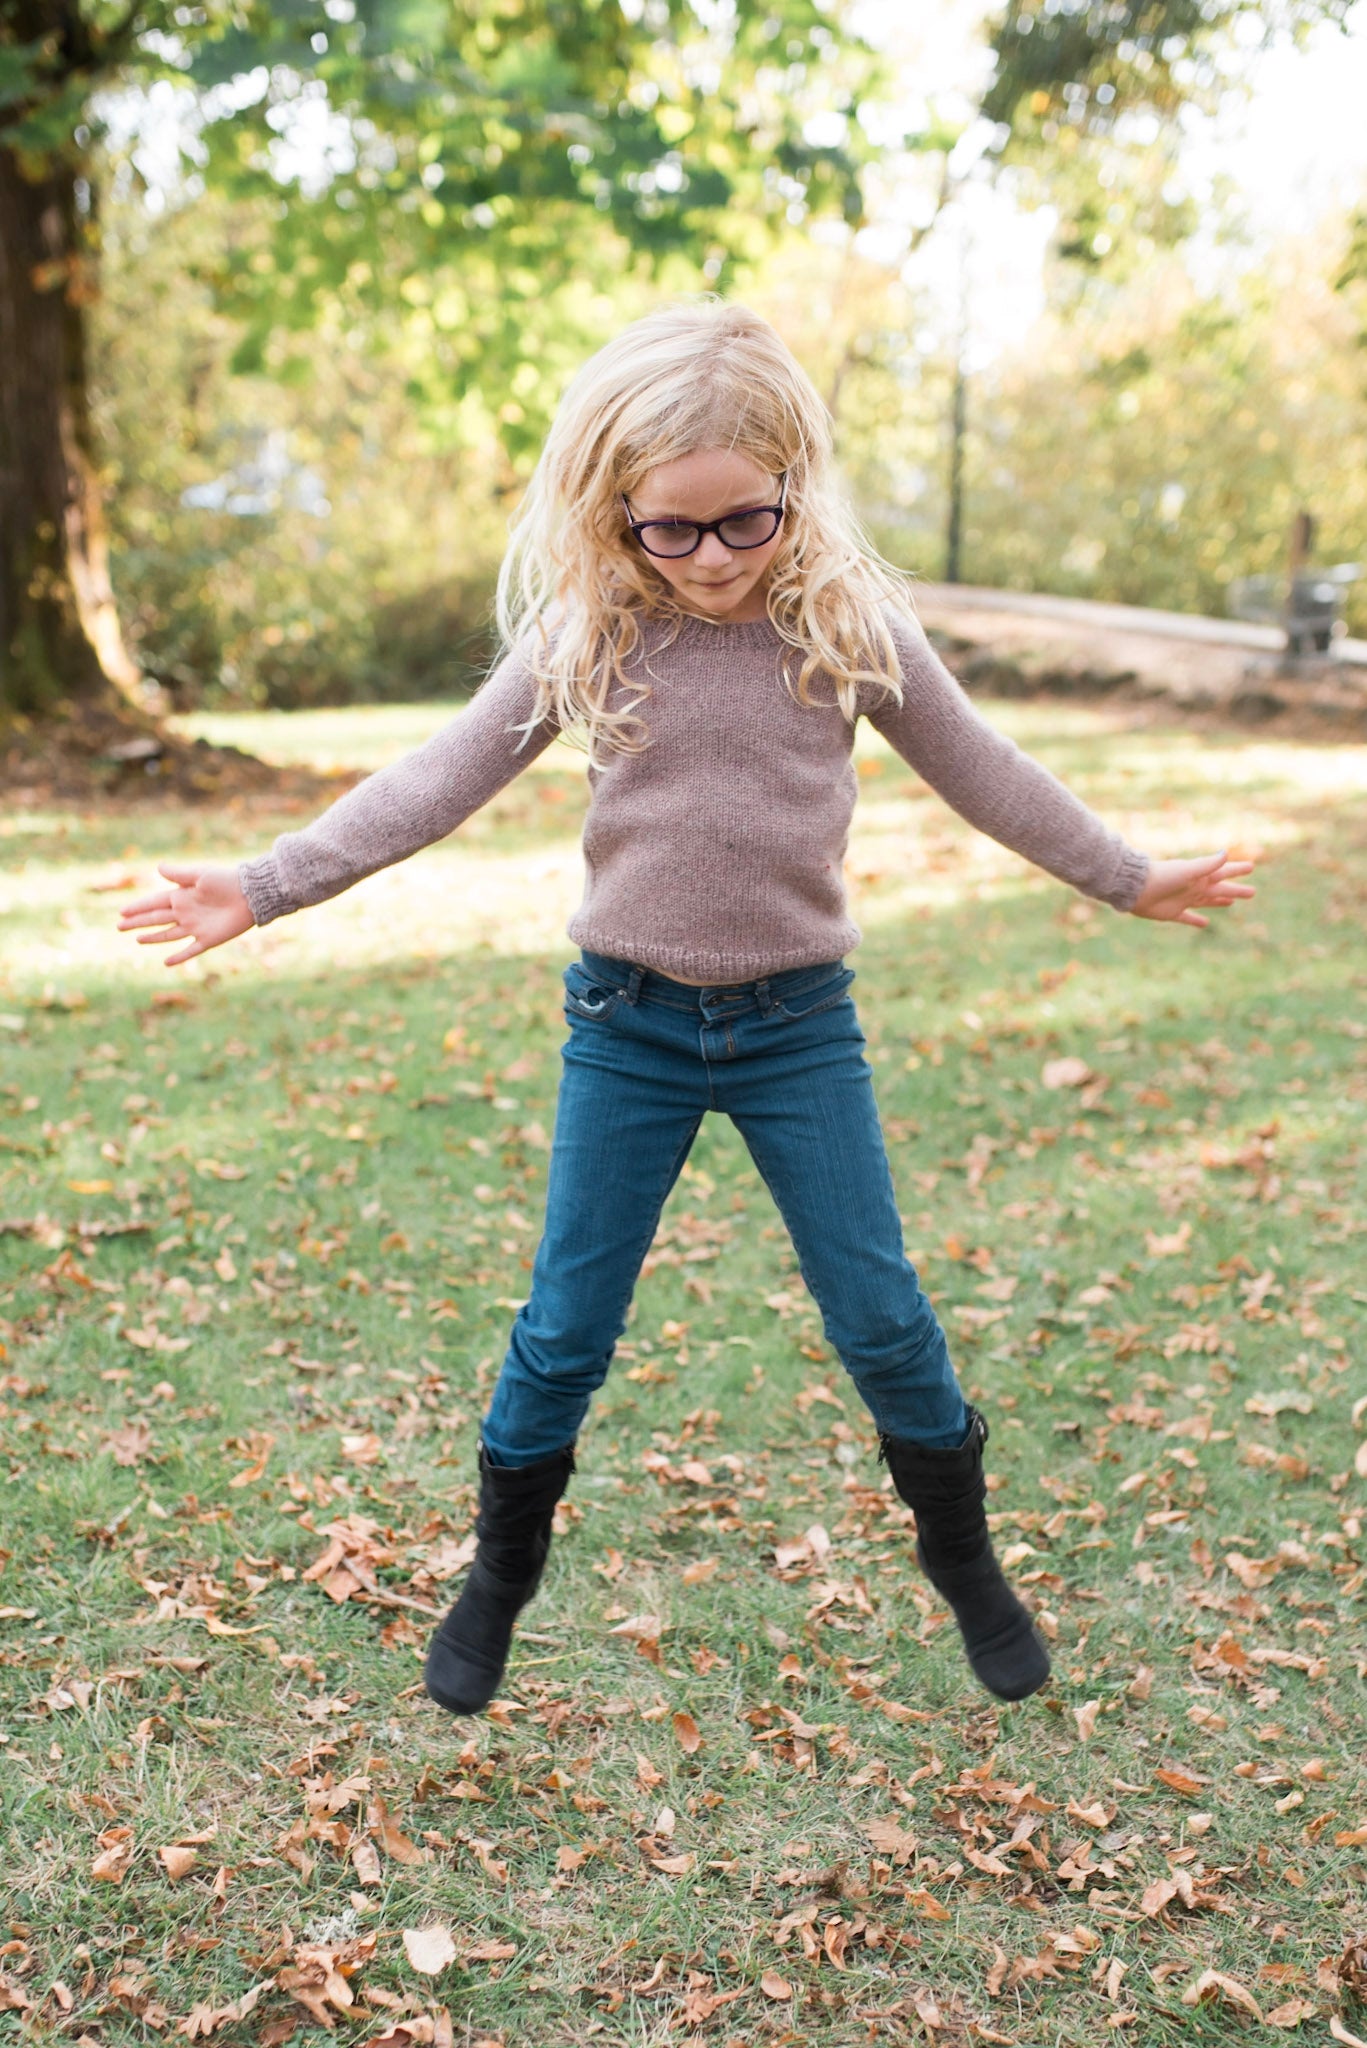 A young blonde girl, pictured jumping, wears a light purple knit pullover with blue jeans and black boots.